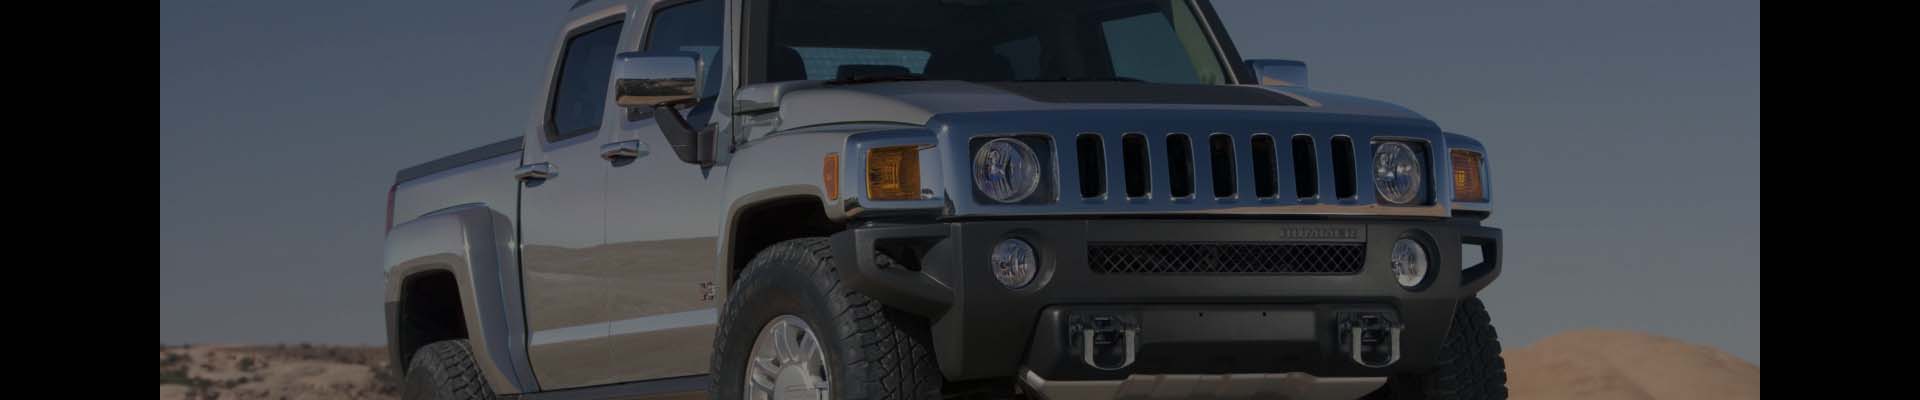 Shop Replacement and OEM Hummer Parts with Discounted Price on the Net